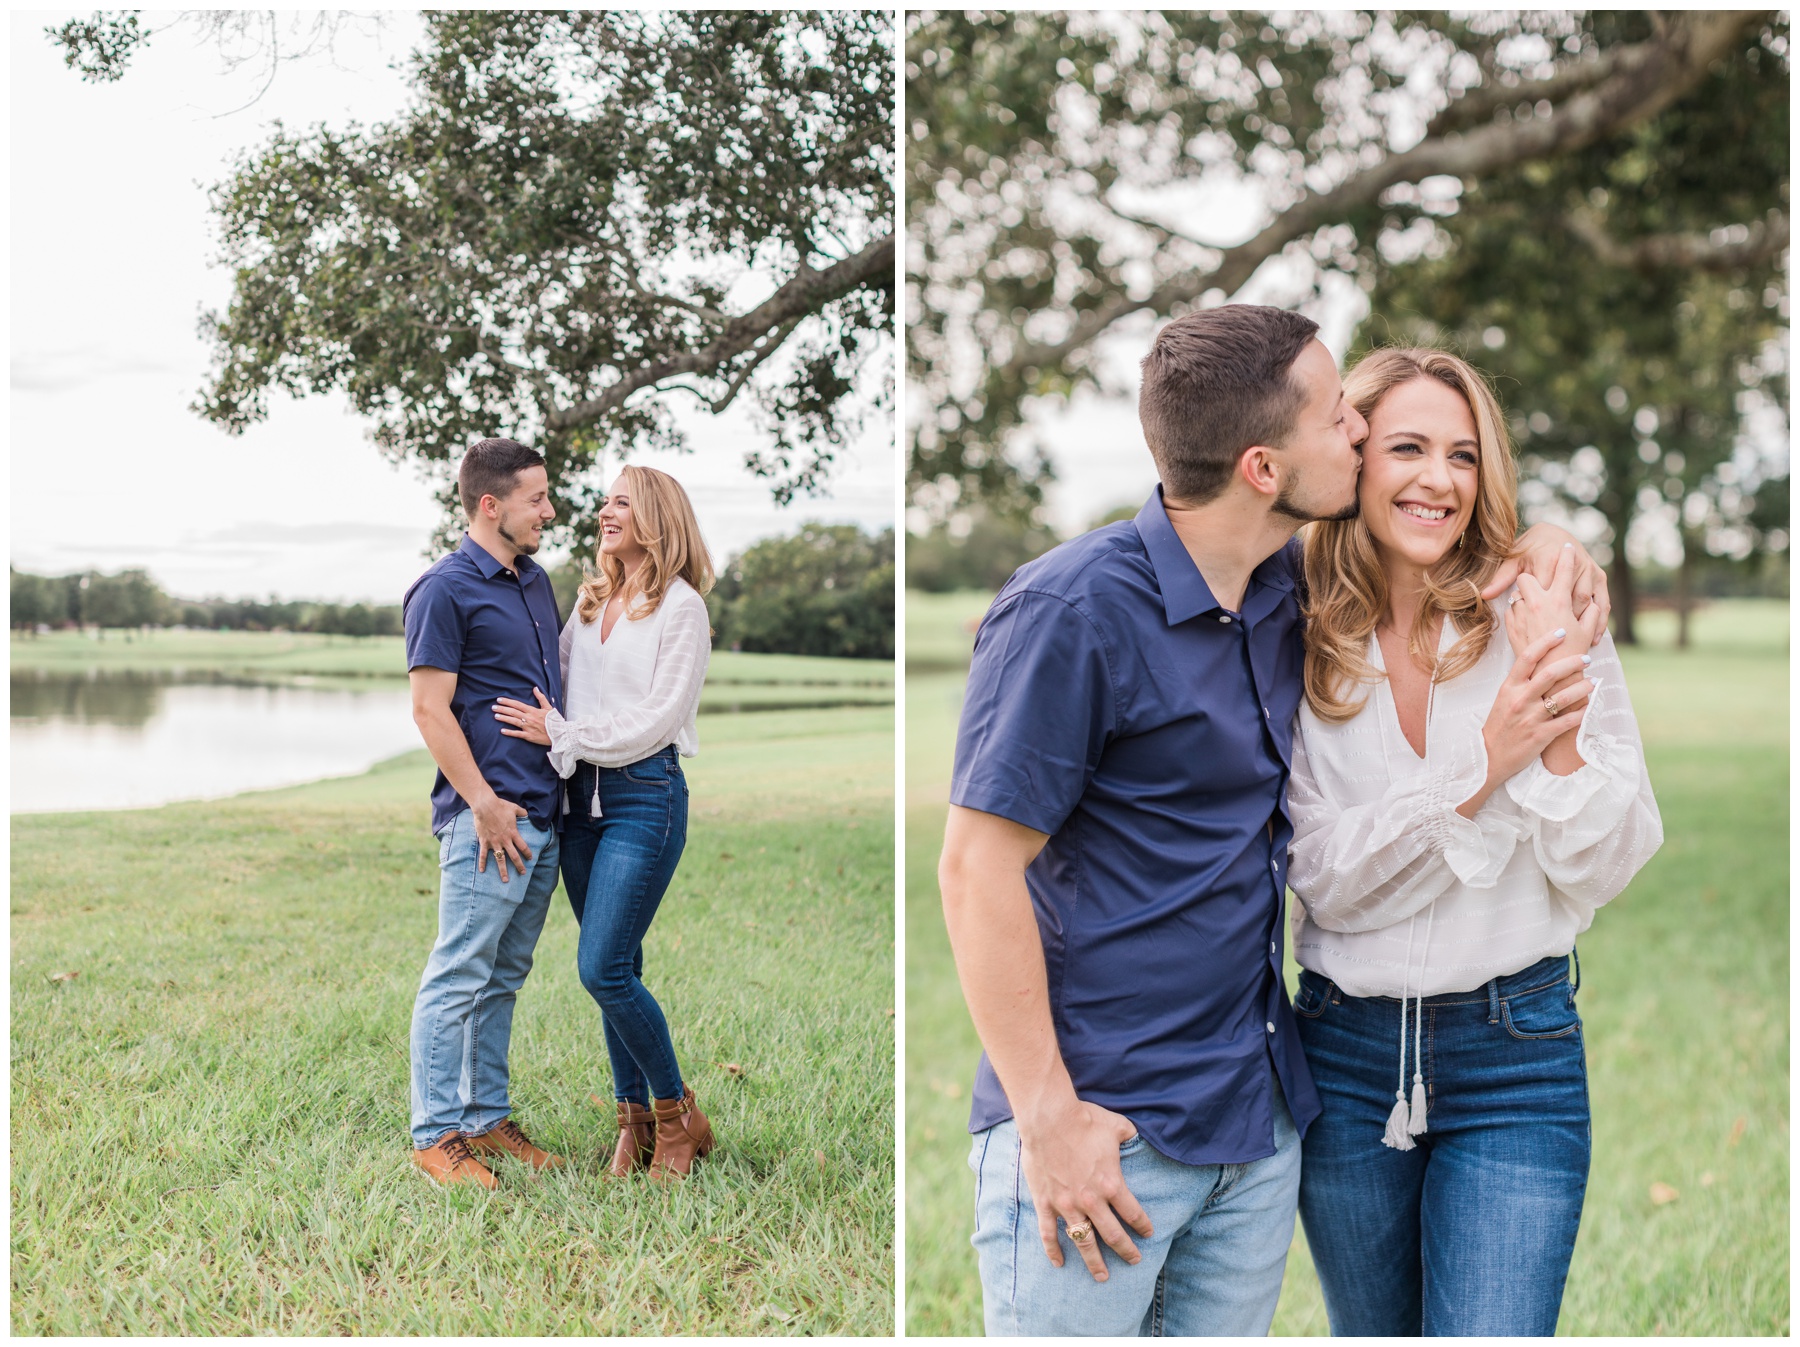 Casual engagement session outfits for a Houston engagement